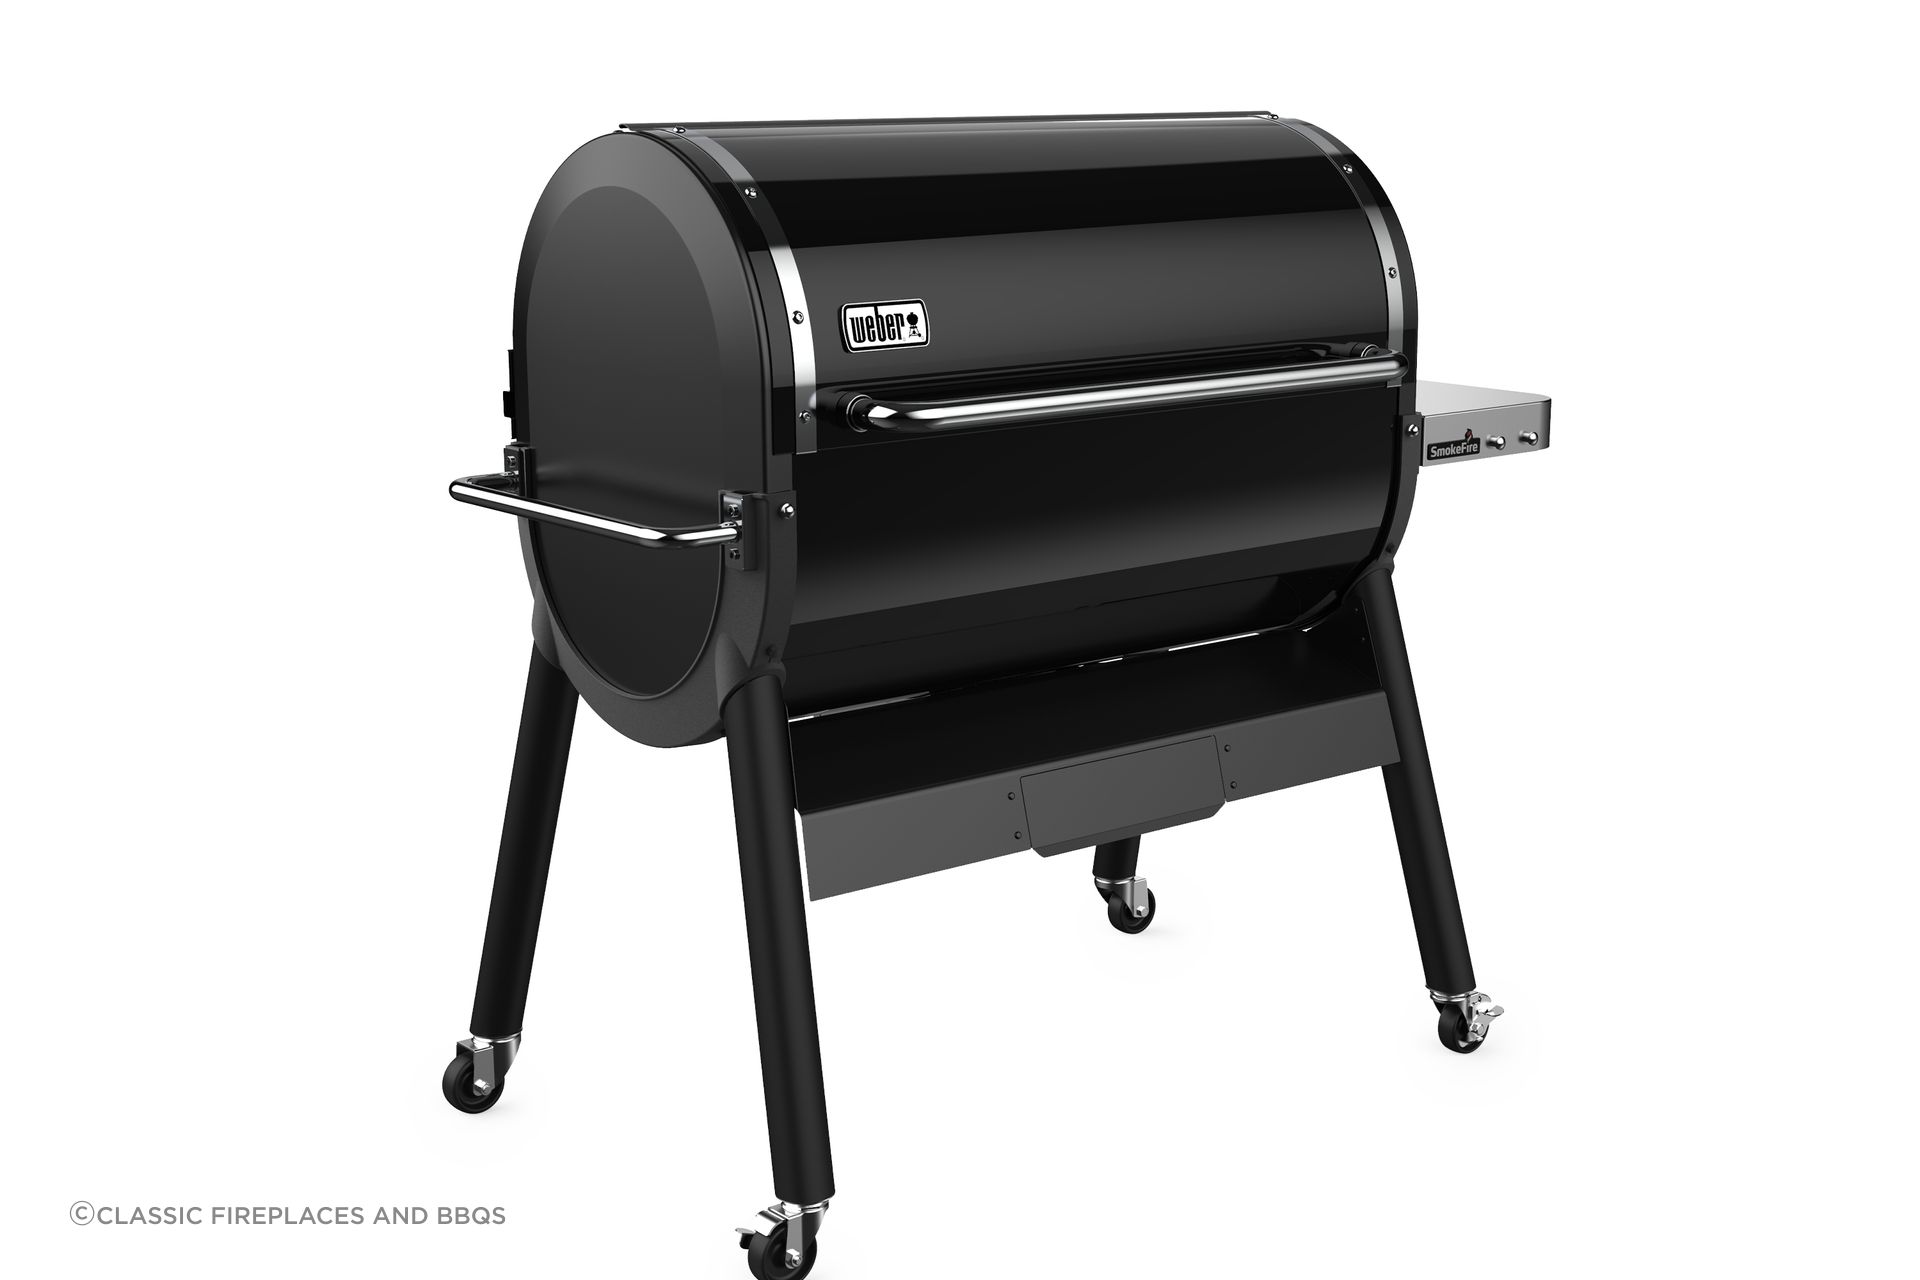 If your looking to slow cook meat a smoker is a great choice. Featured product: Weber Smokefire EX6 GBS Pellet Grill Black